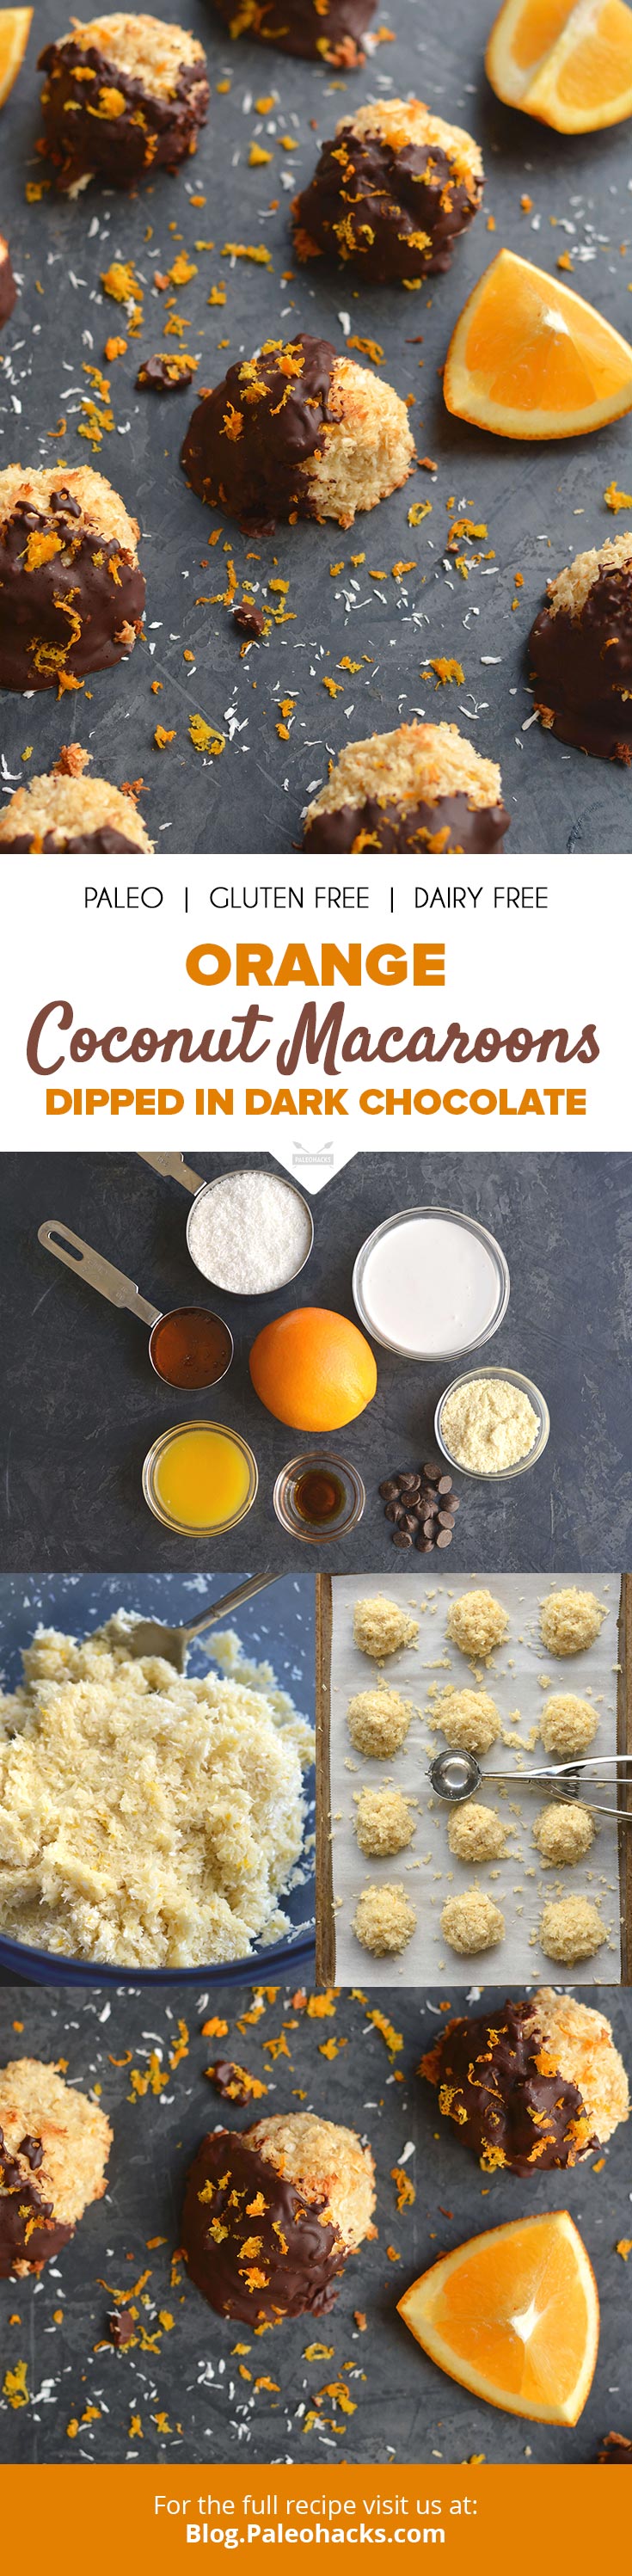 These sticky sweet coconut macaroons prove orange and chocolate are a match made in dessert heaven.